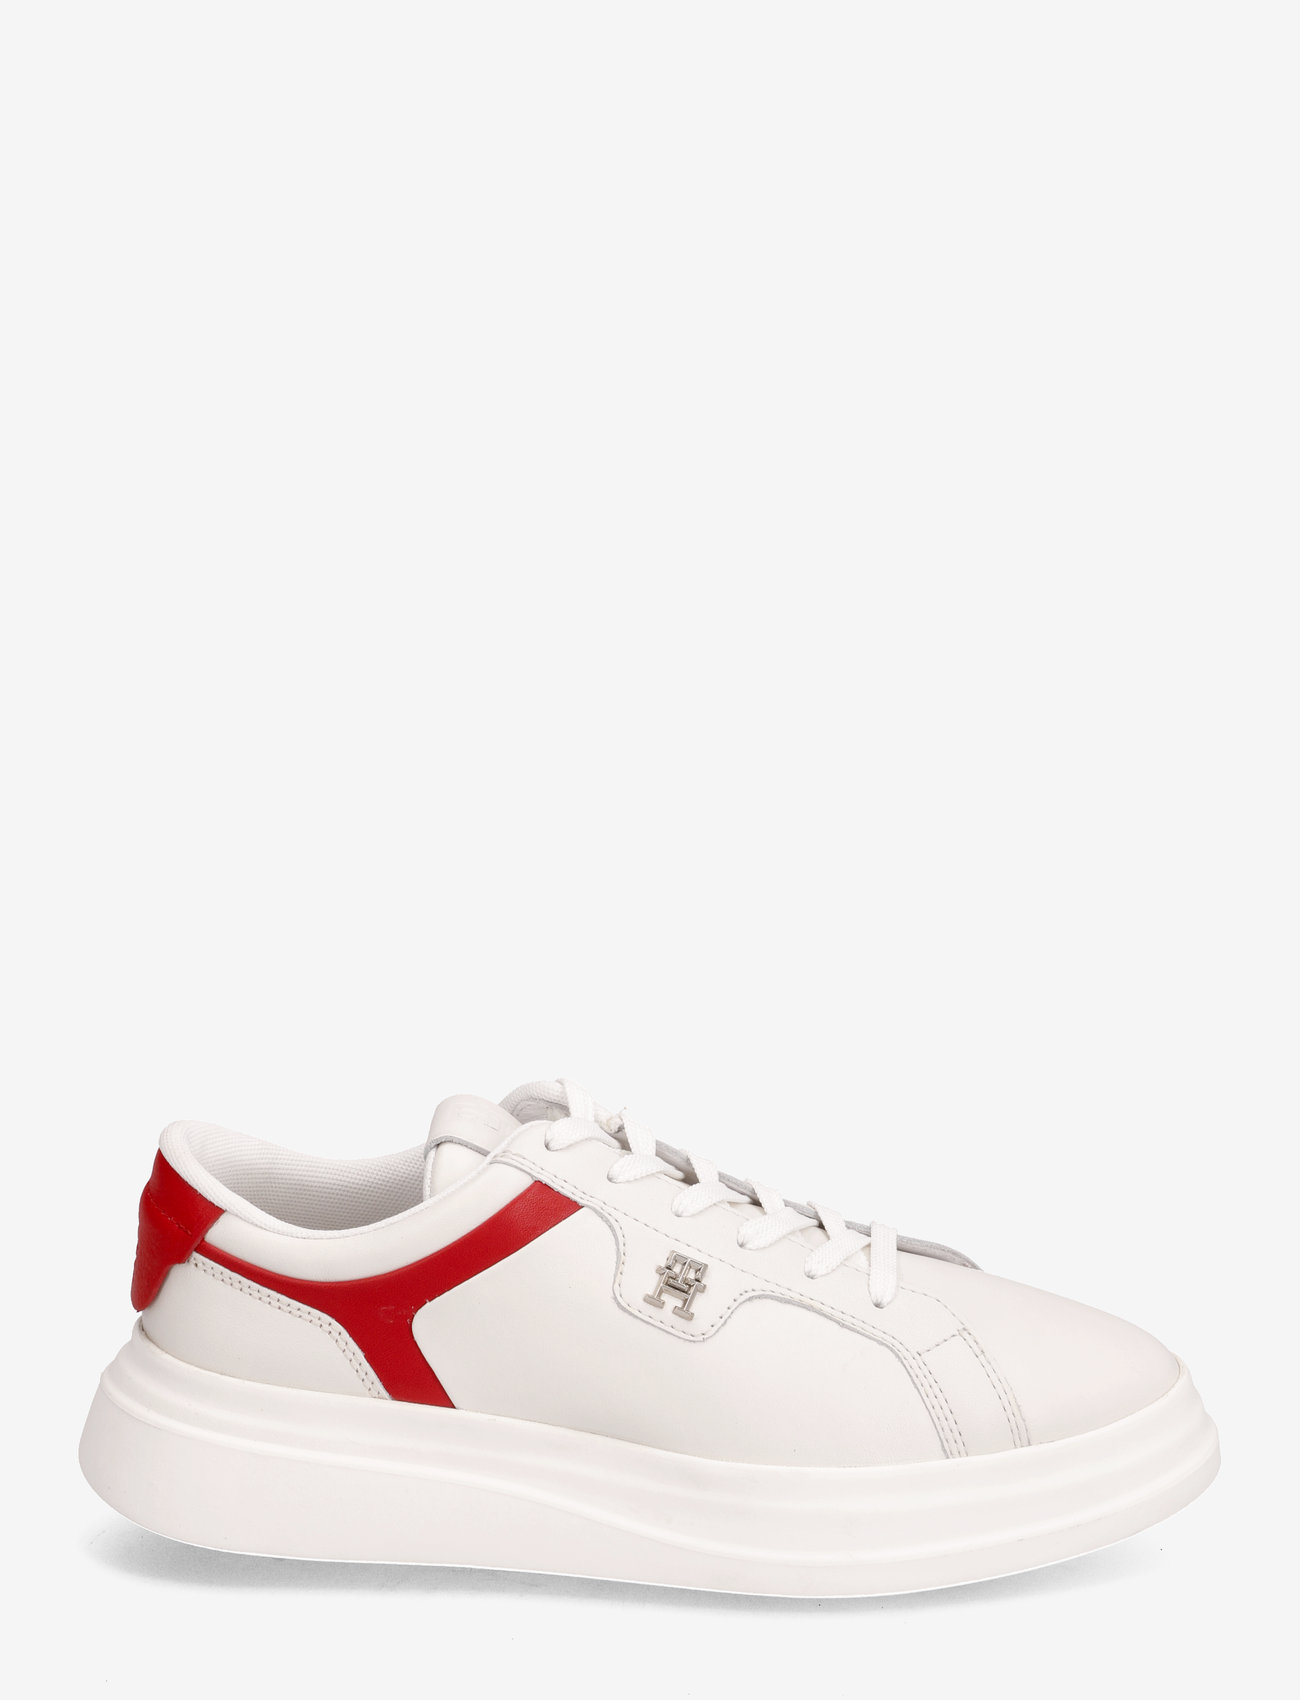 Tommy Hilfiger - POINTY COURT SNEAKER - naised - ecru/fierce red - 1